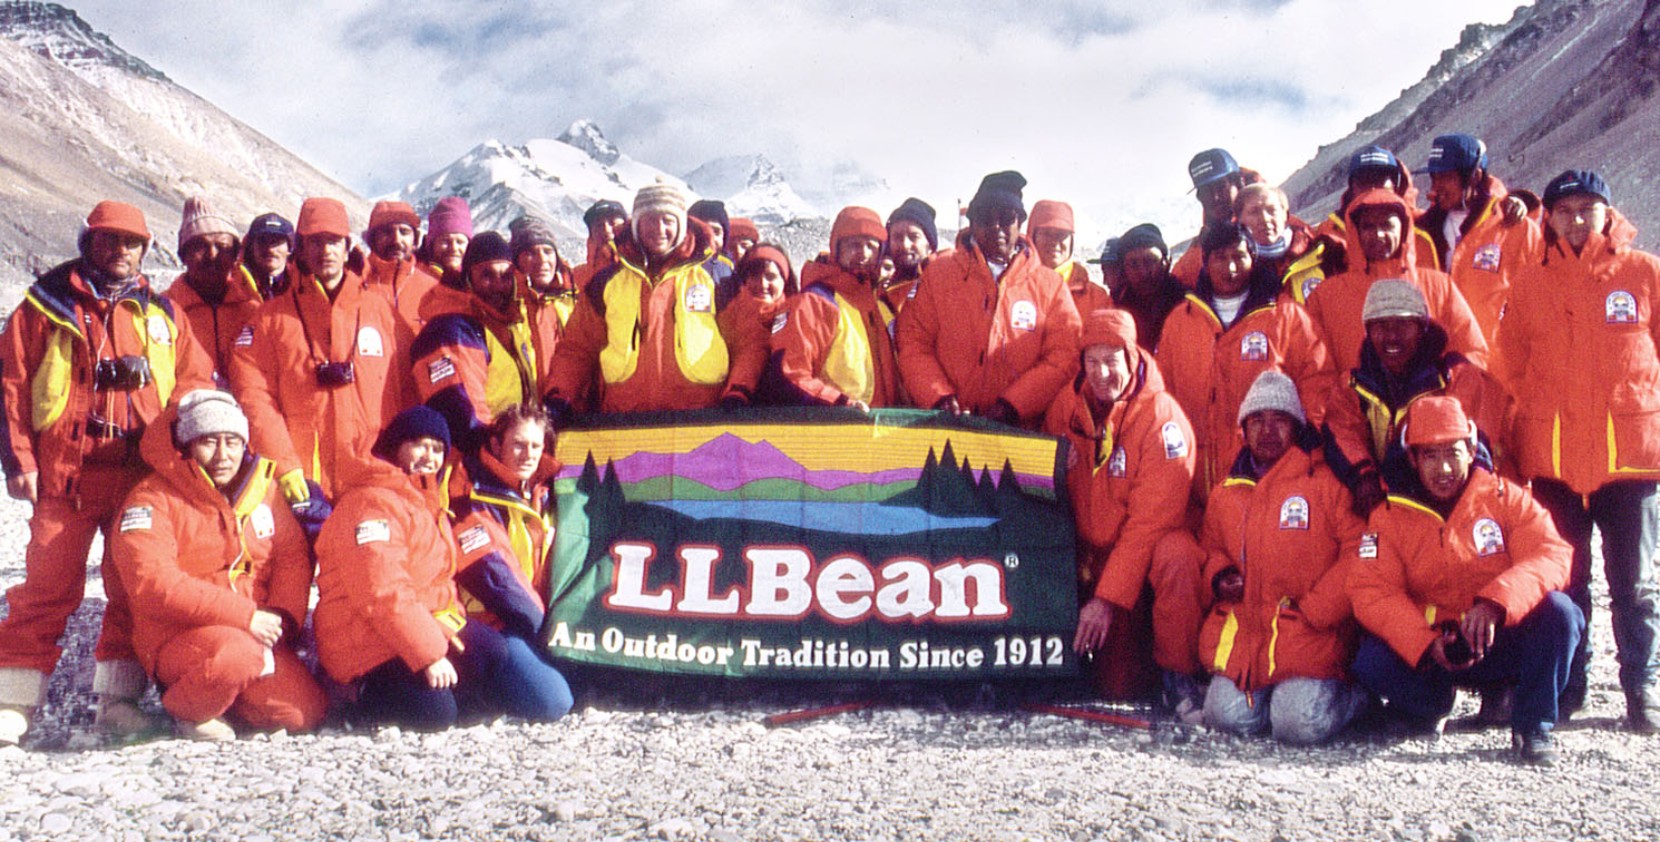 Members of the Everest Peace Climb pose with an L.L.Bean flag.